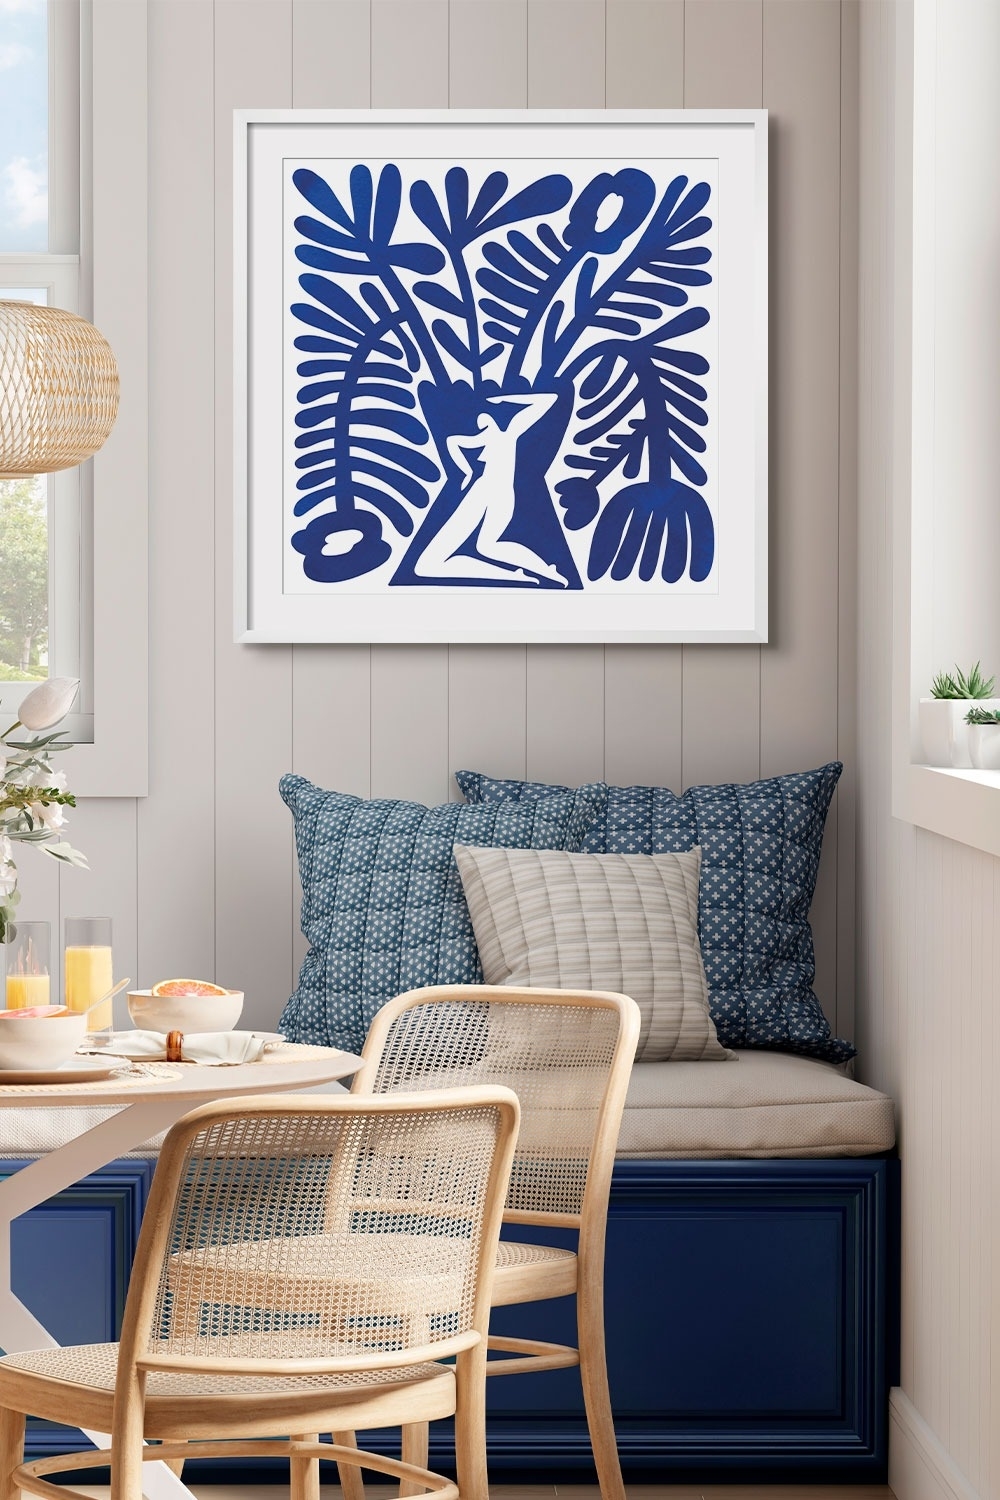 Artwork featuring a botanical silhouette hangs above a bench with cushions in a breakfast nook